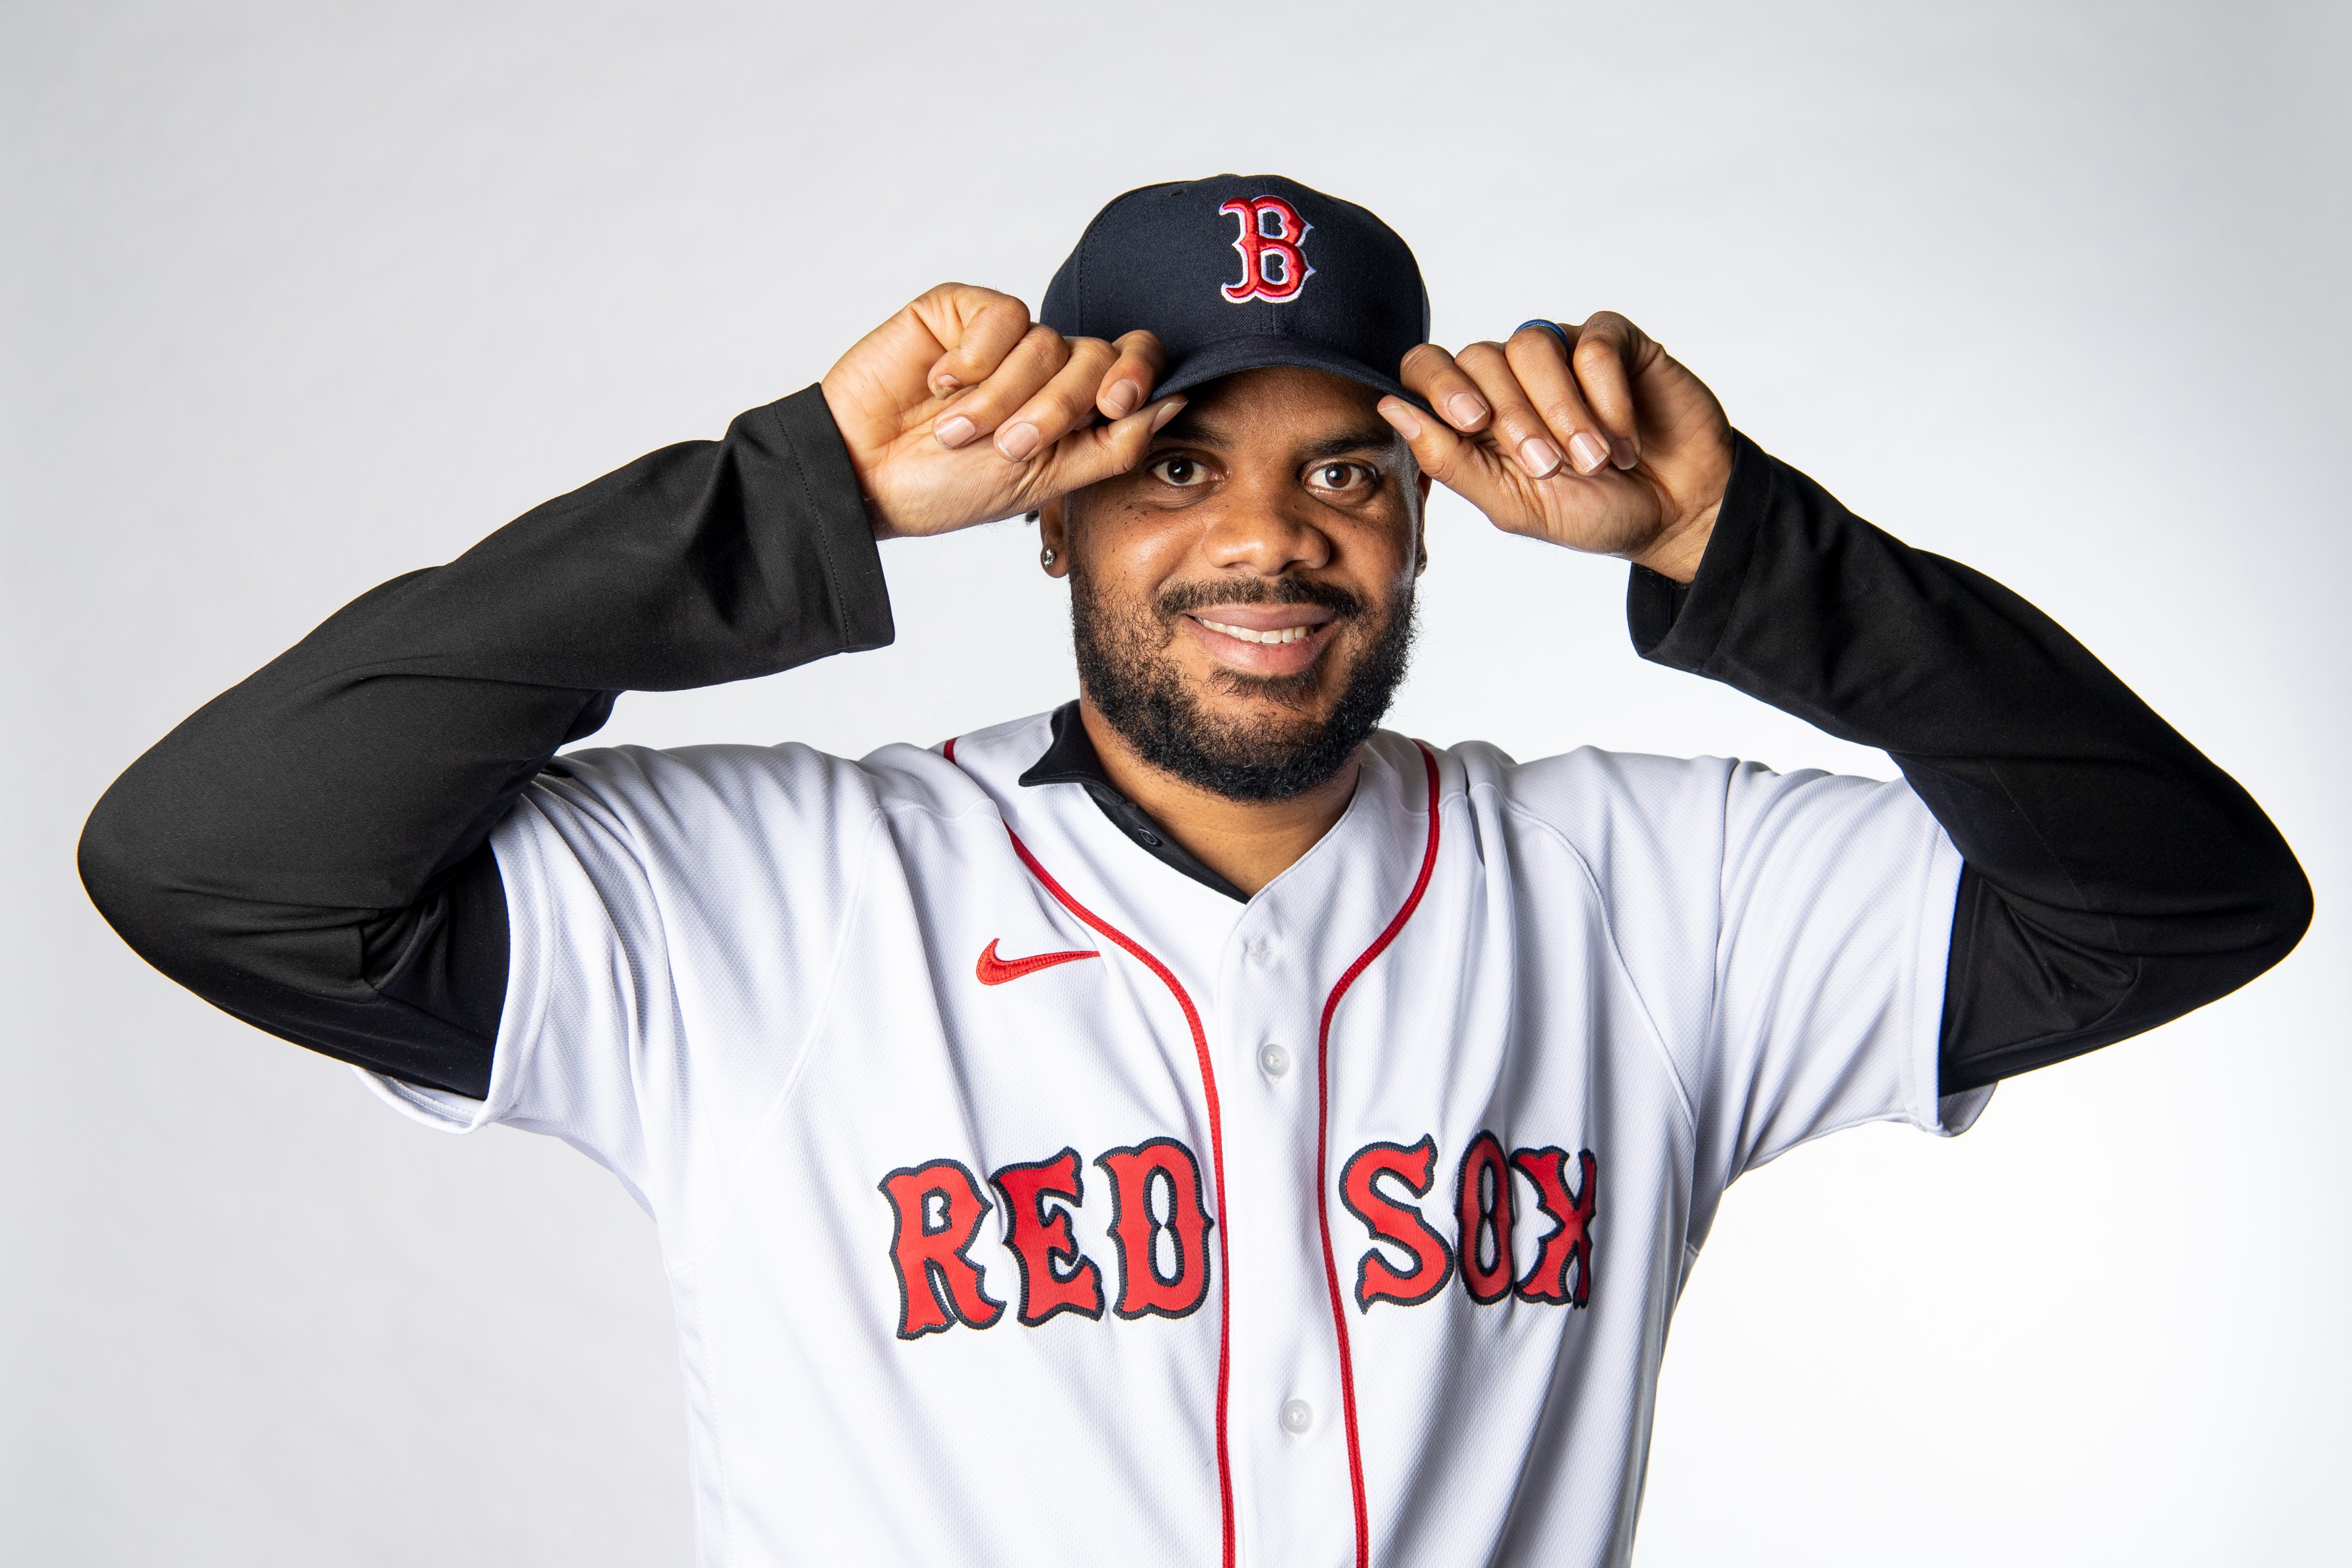 Red Sox on X: 𝗖𝗟𝗢𝗦𝗘𝗥  / X